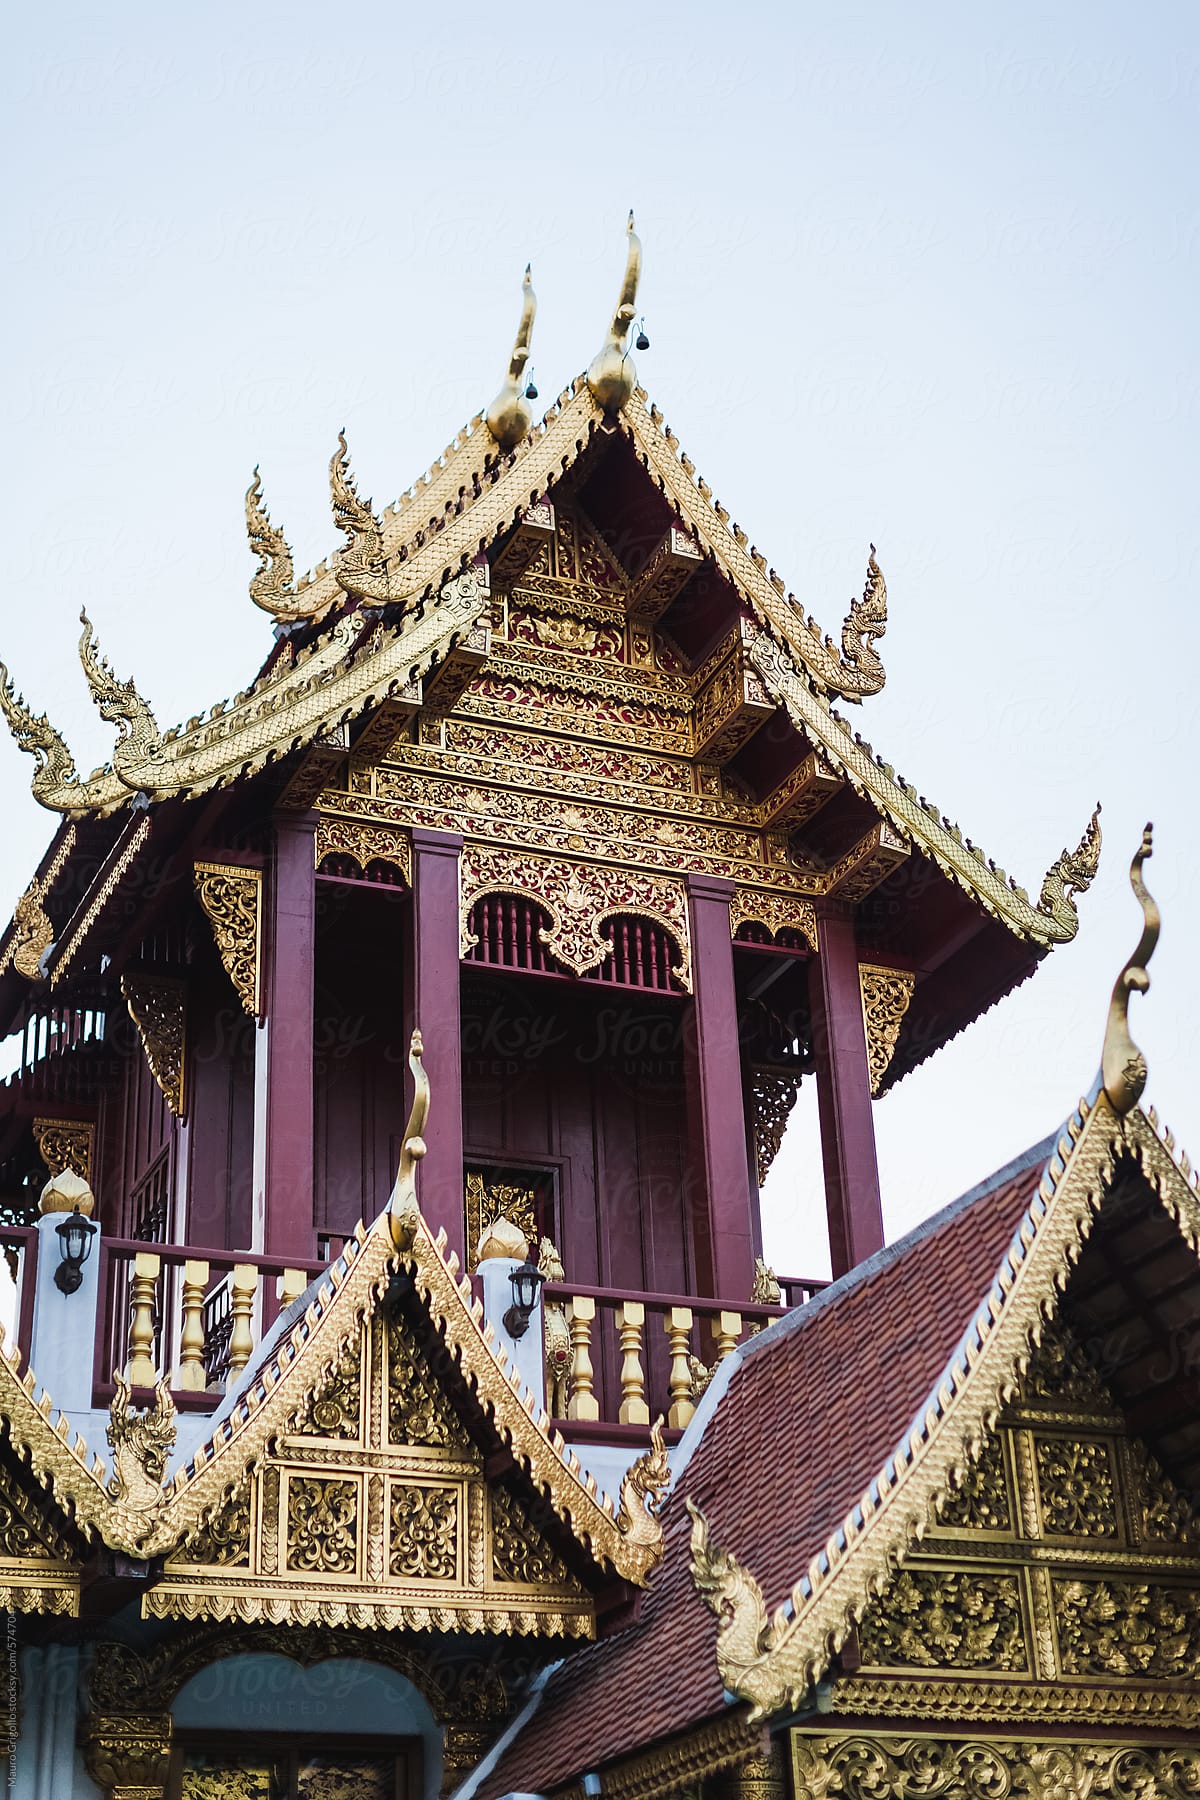 Architectural features of a buddhist Temple in Thailand